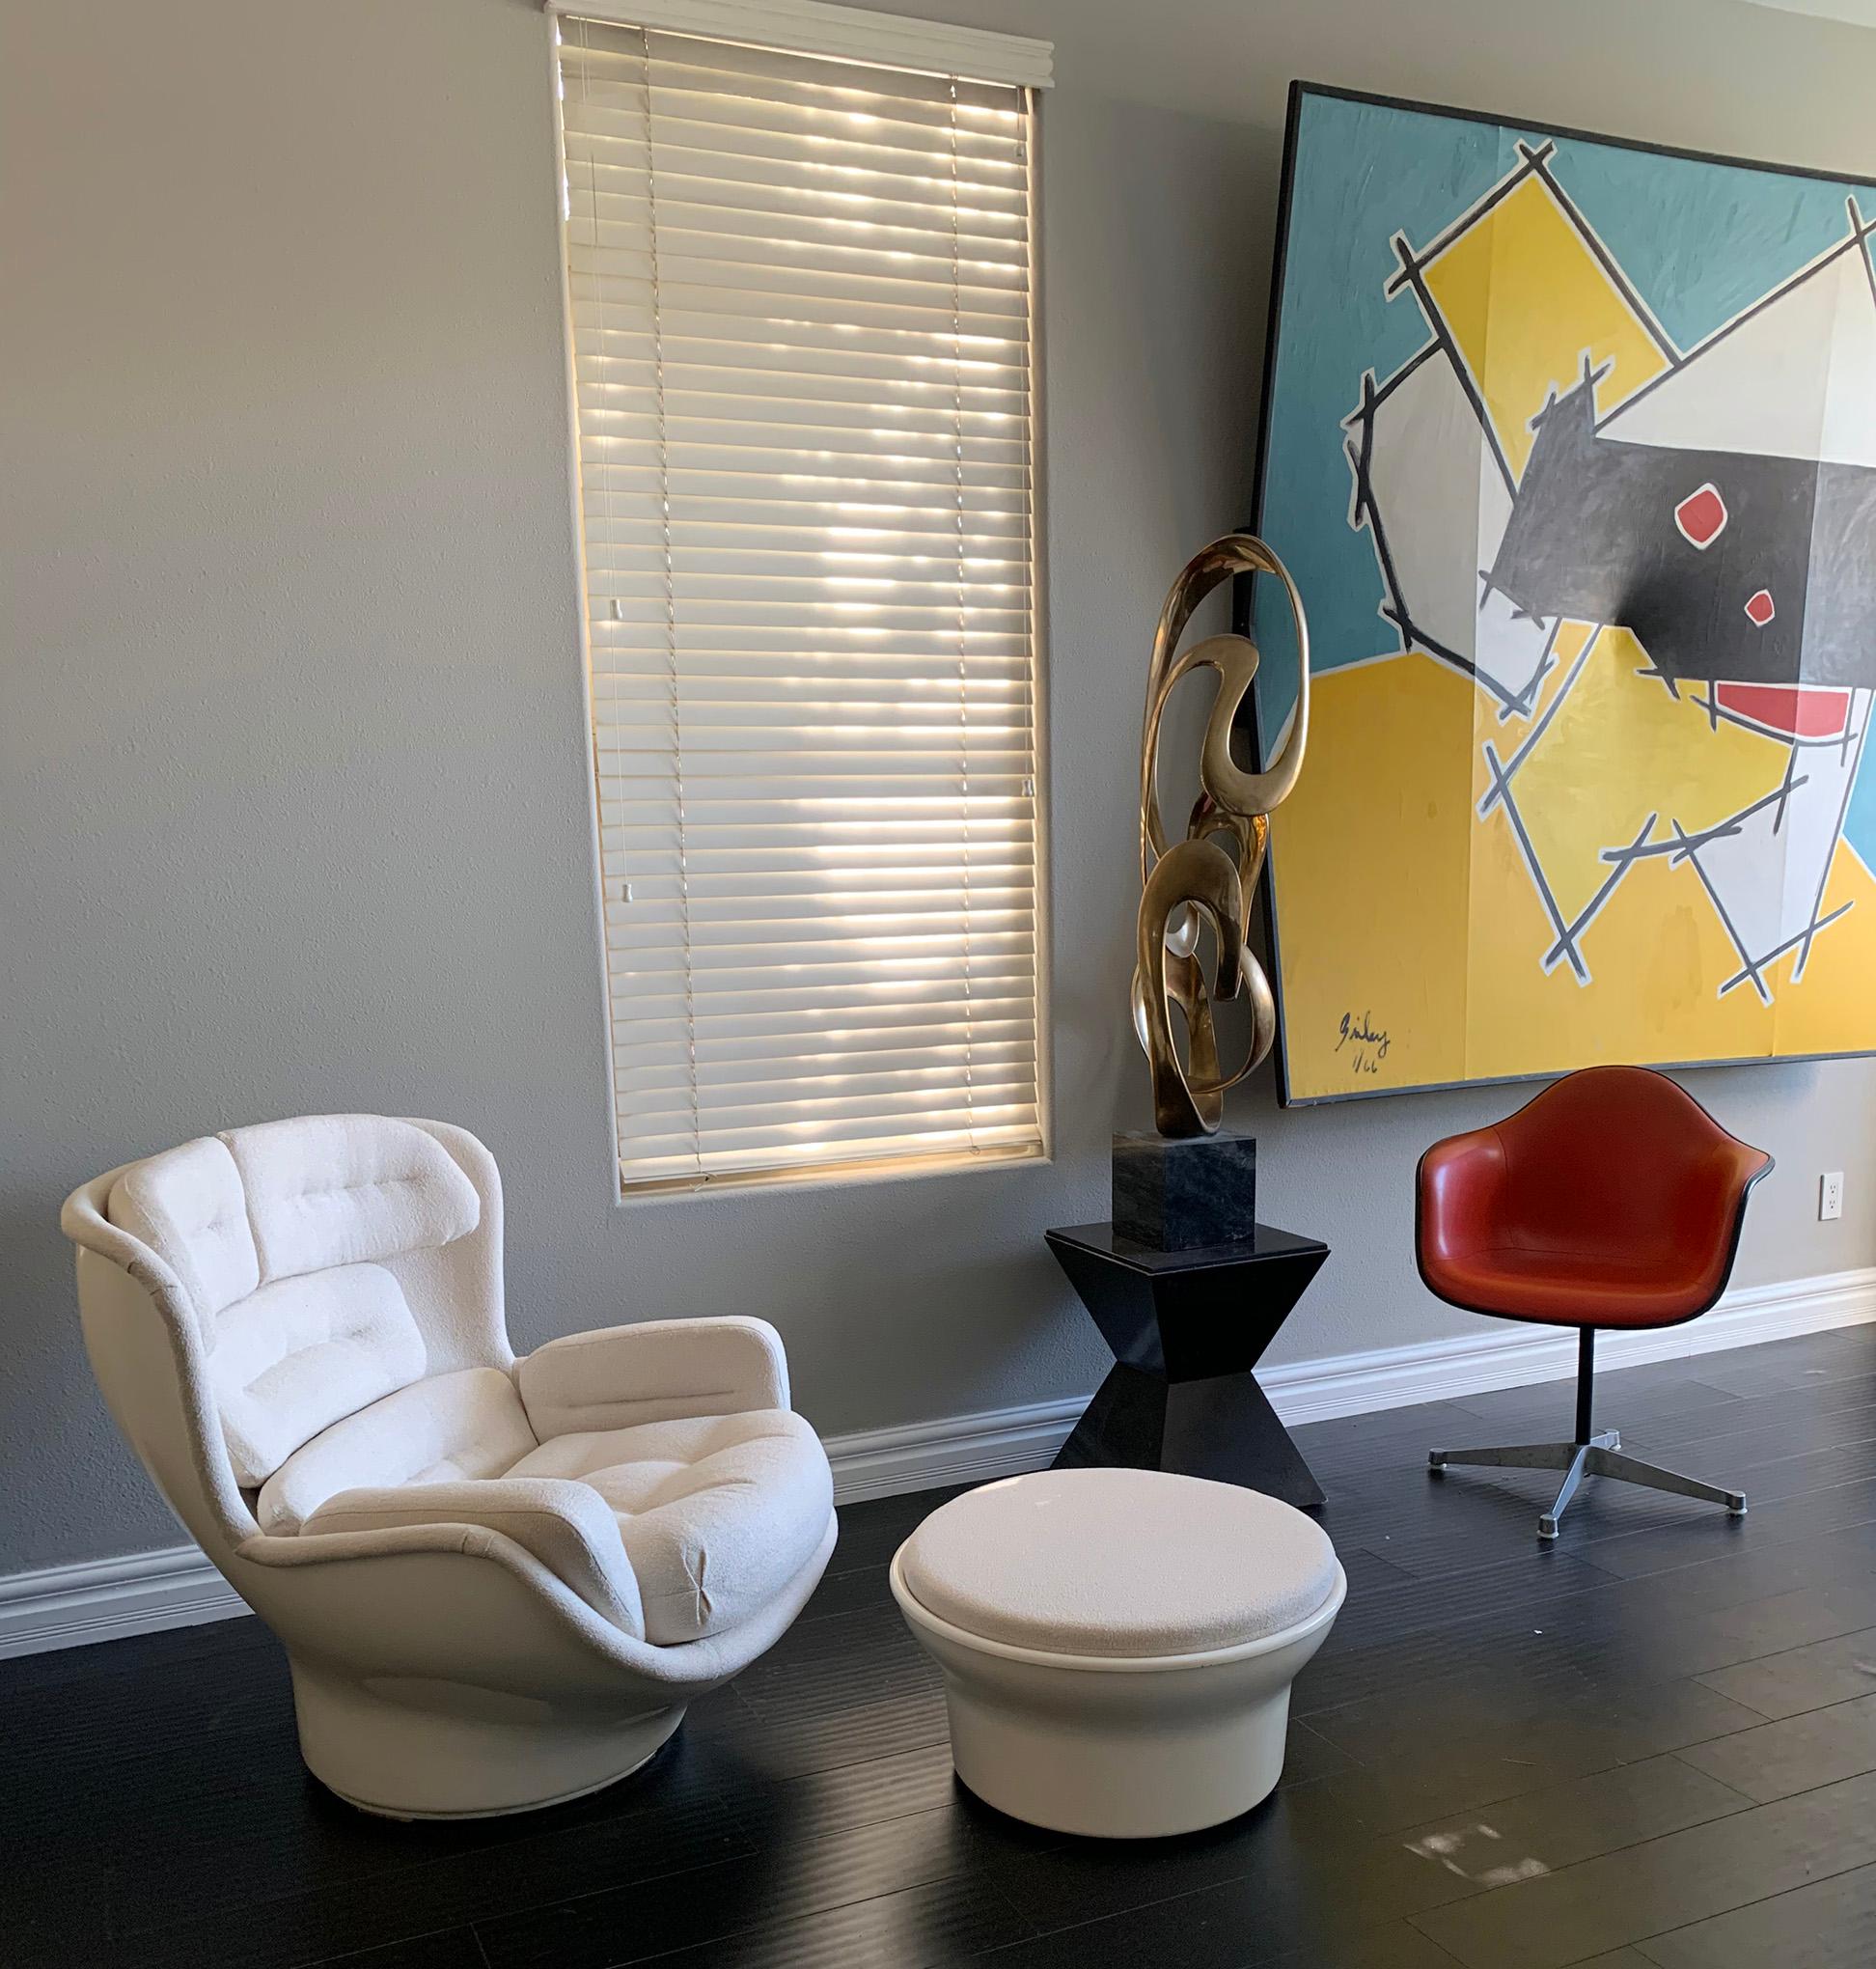 This one of a kind chair is the brainchild of our gallery. After picking up a 1970s space age fiberglass chair designed by Michel Cadestin Karate chair, we couldn't help but notice how sloppy the vintage vinyl button tufted upholstery was. We then